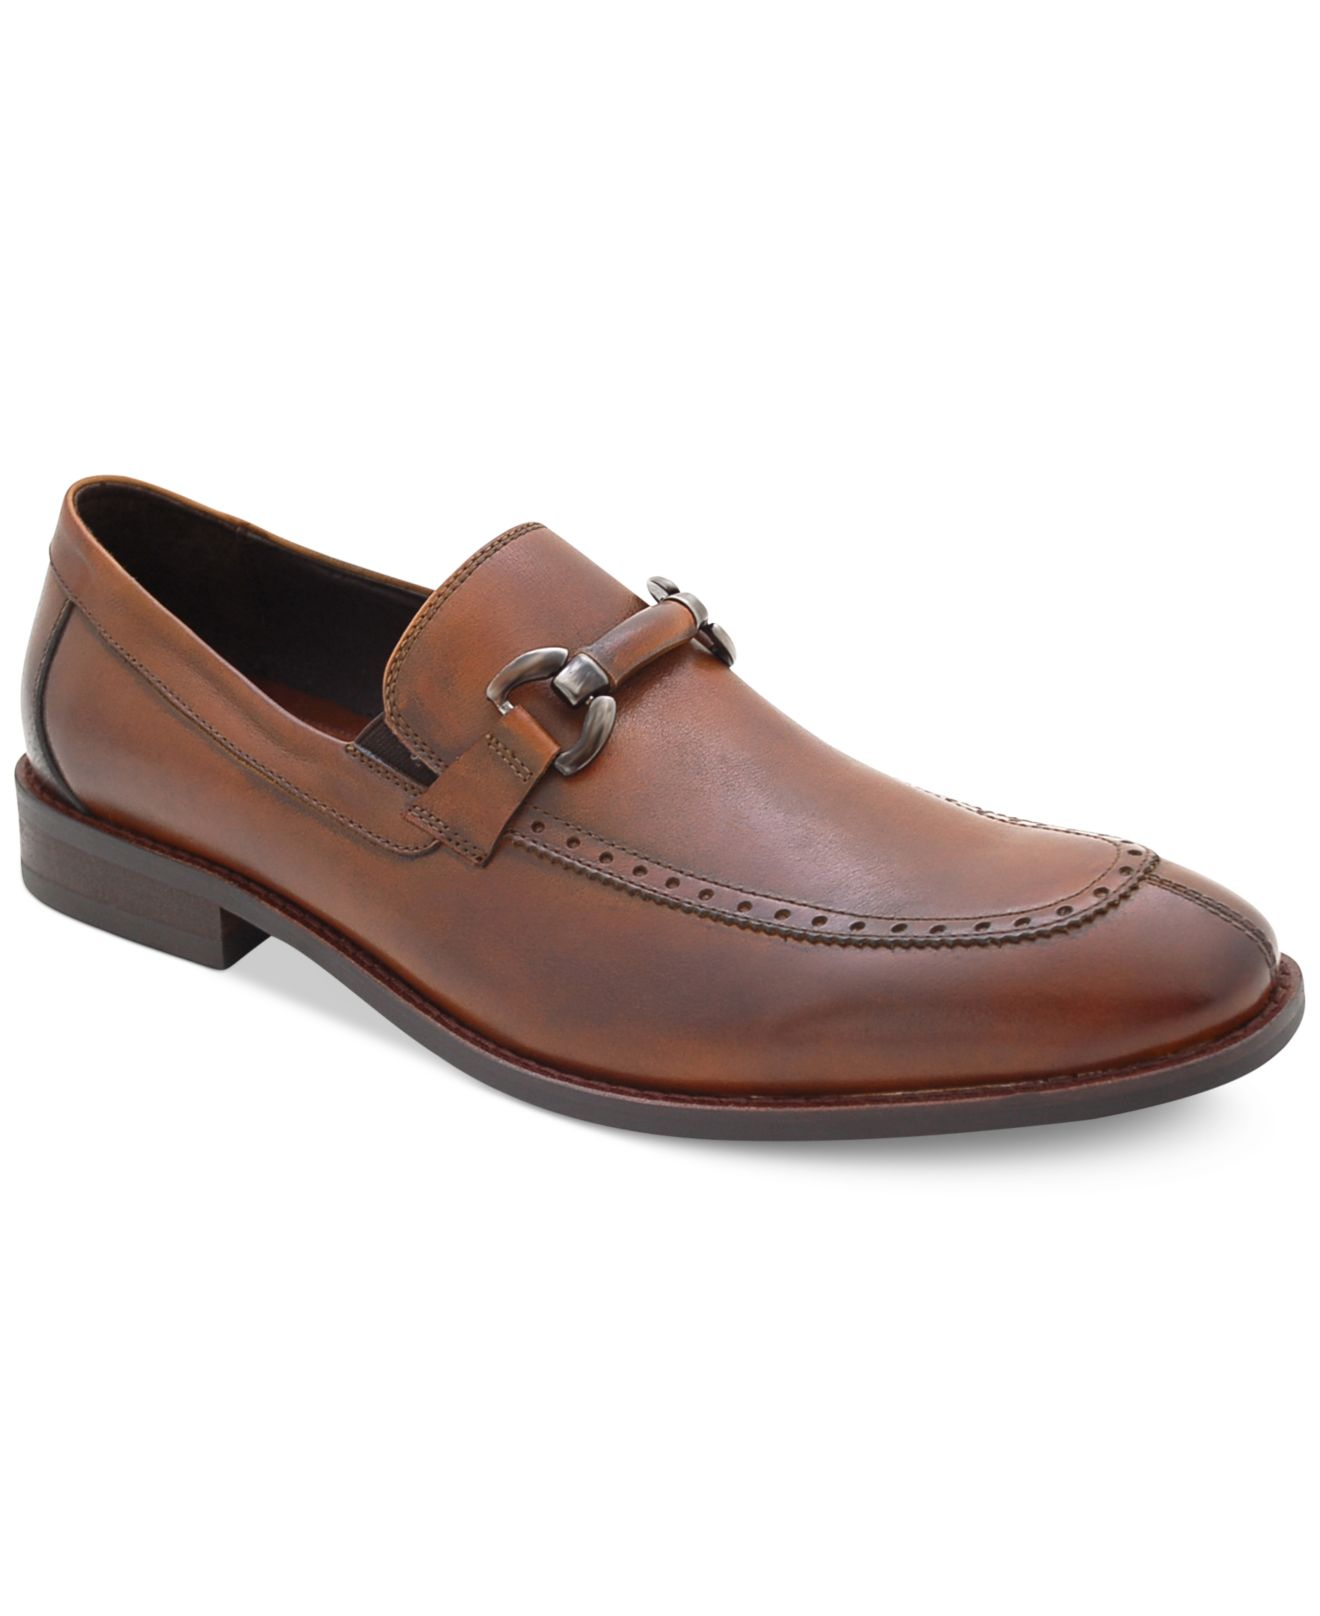 Lyst - Vince Camuto Rosario Bit Loafers in Brown for Men